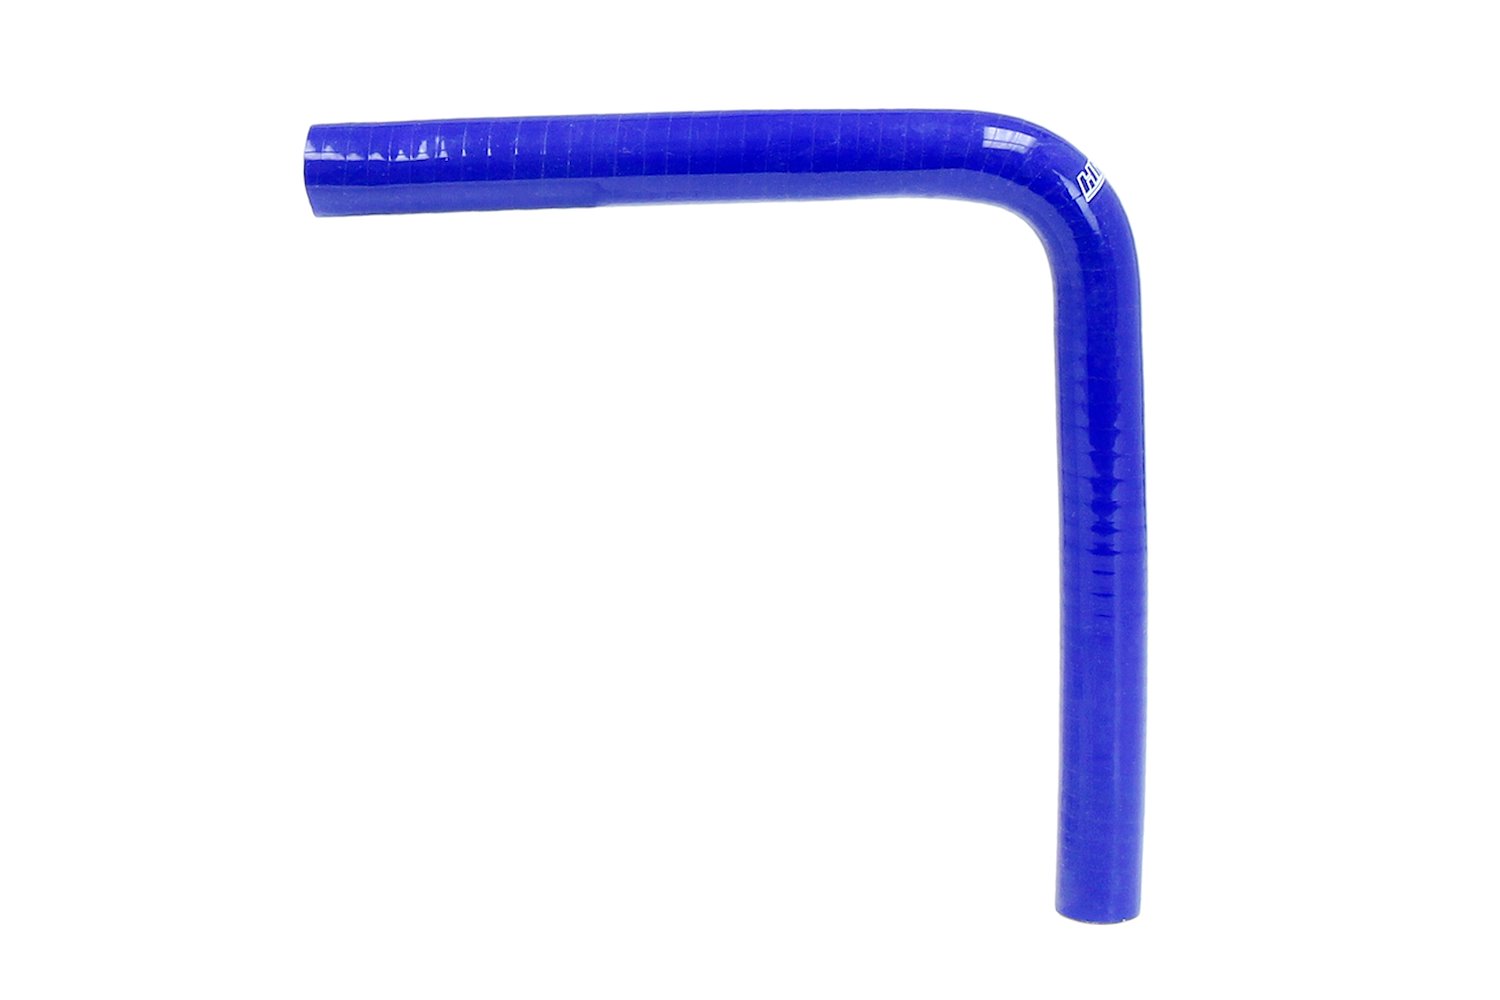 HTSEC90-087-BLUE Silicone 90-Degree Elbow Coupler Hose, High-Temp 4-Ply Reinforced, 7/8 in. ID, Blue